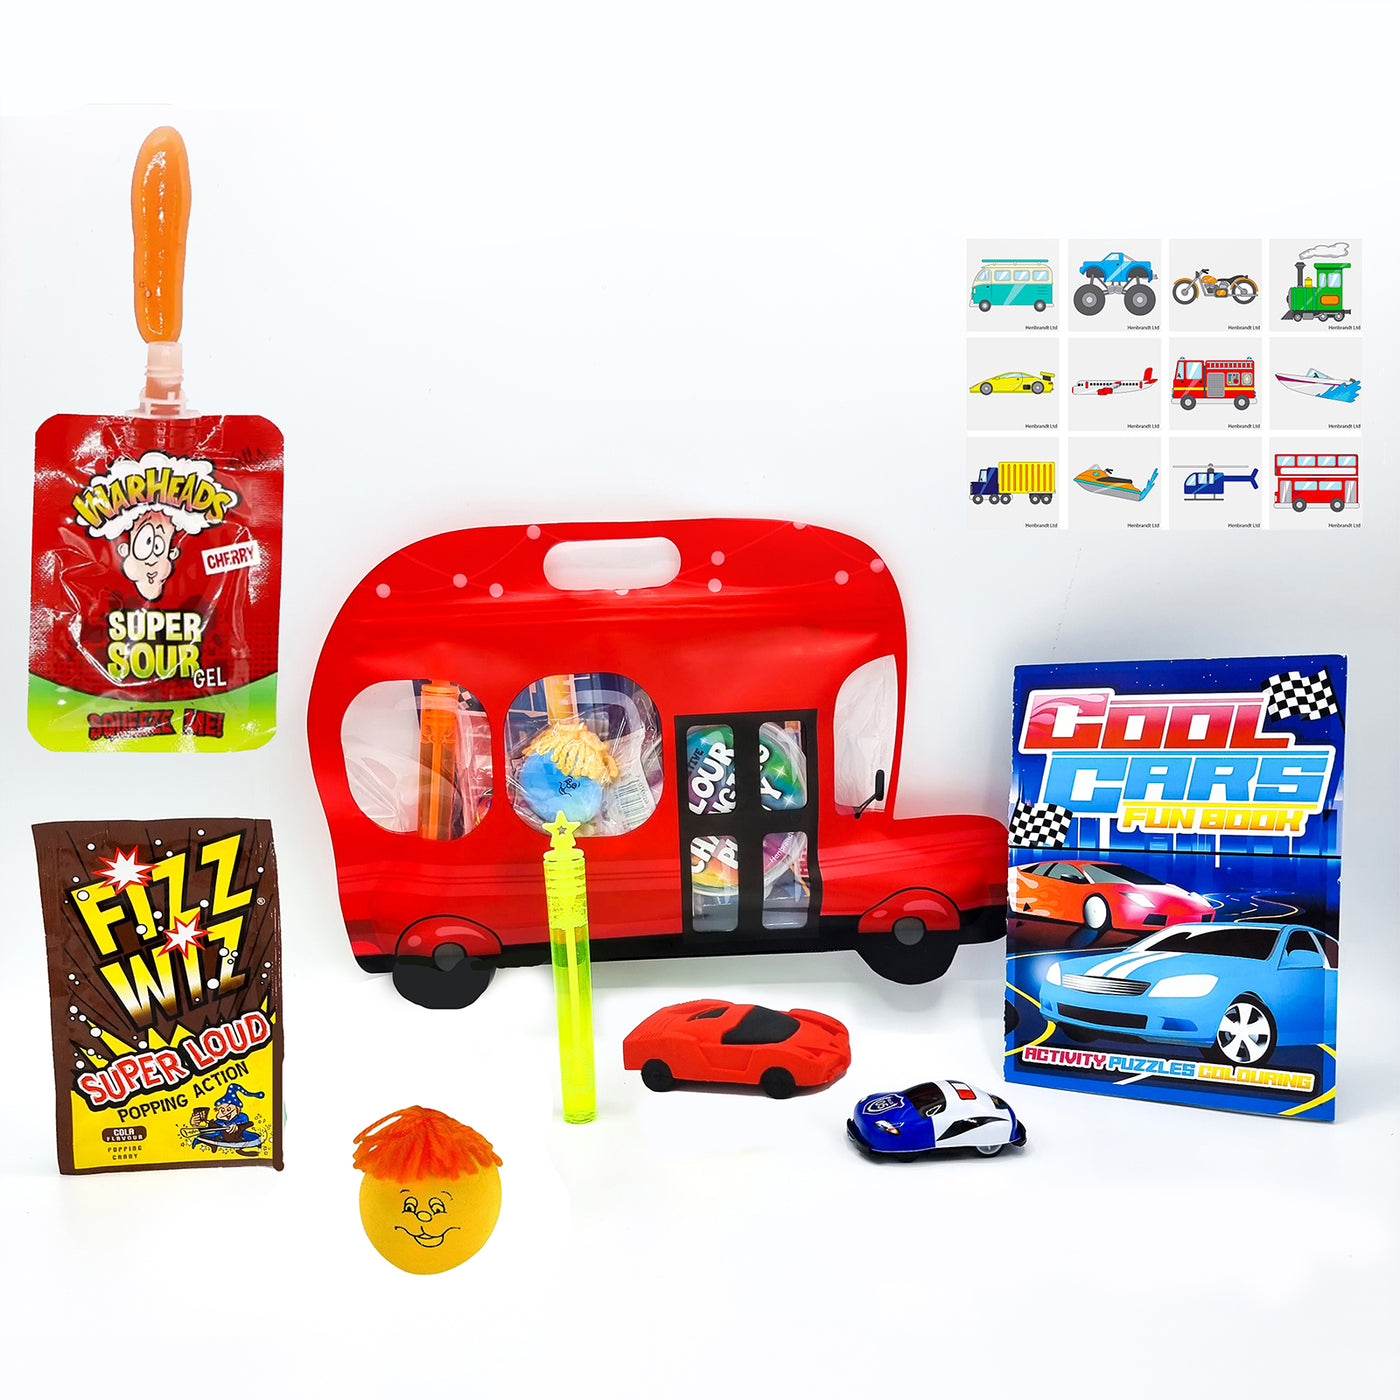 Children's Pre Filled Cars Red Bus Party Goody Bags With Toys And Sweets. Boys Party Favours.